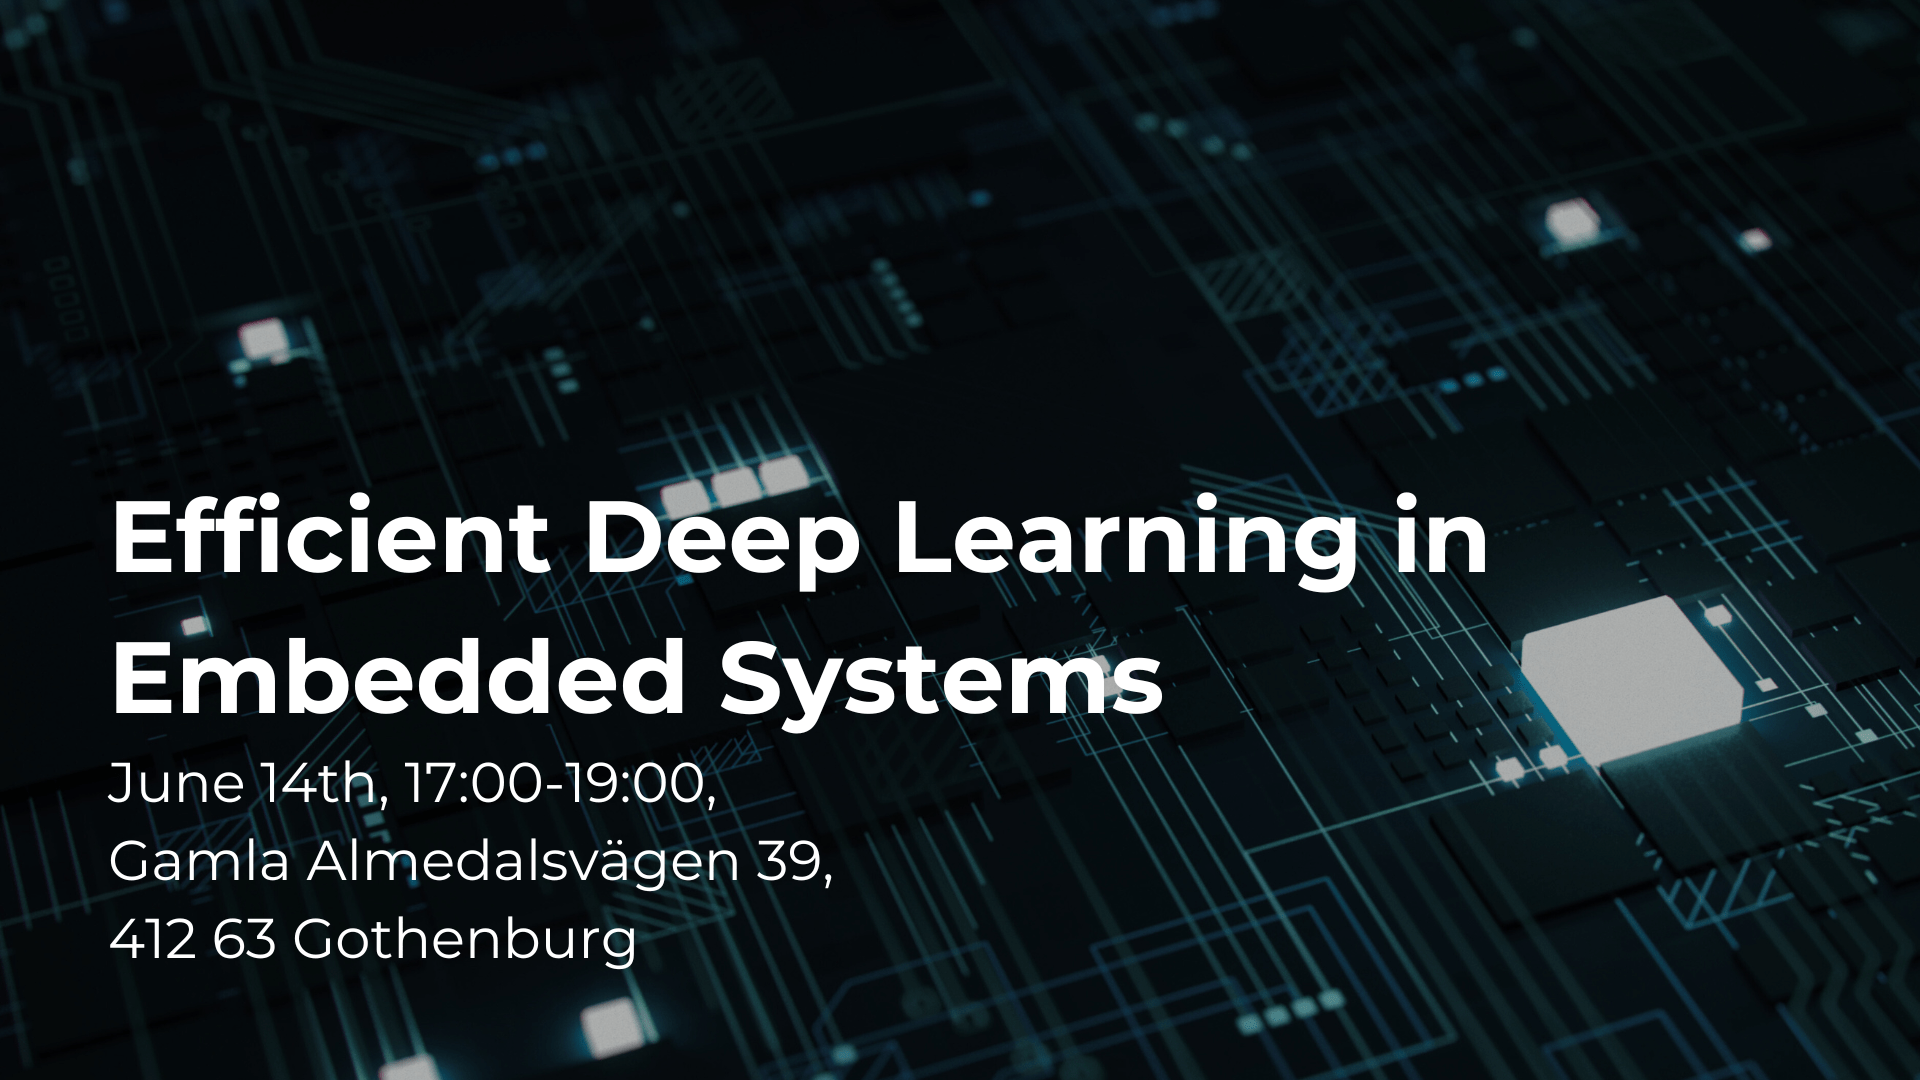 Efficient Deep Learning in Embedded Systems